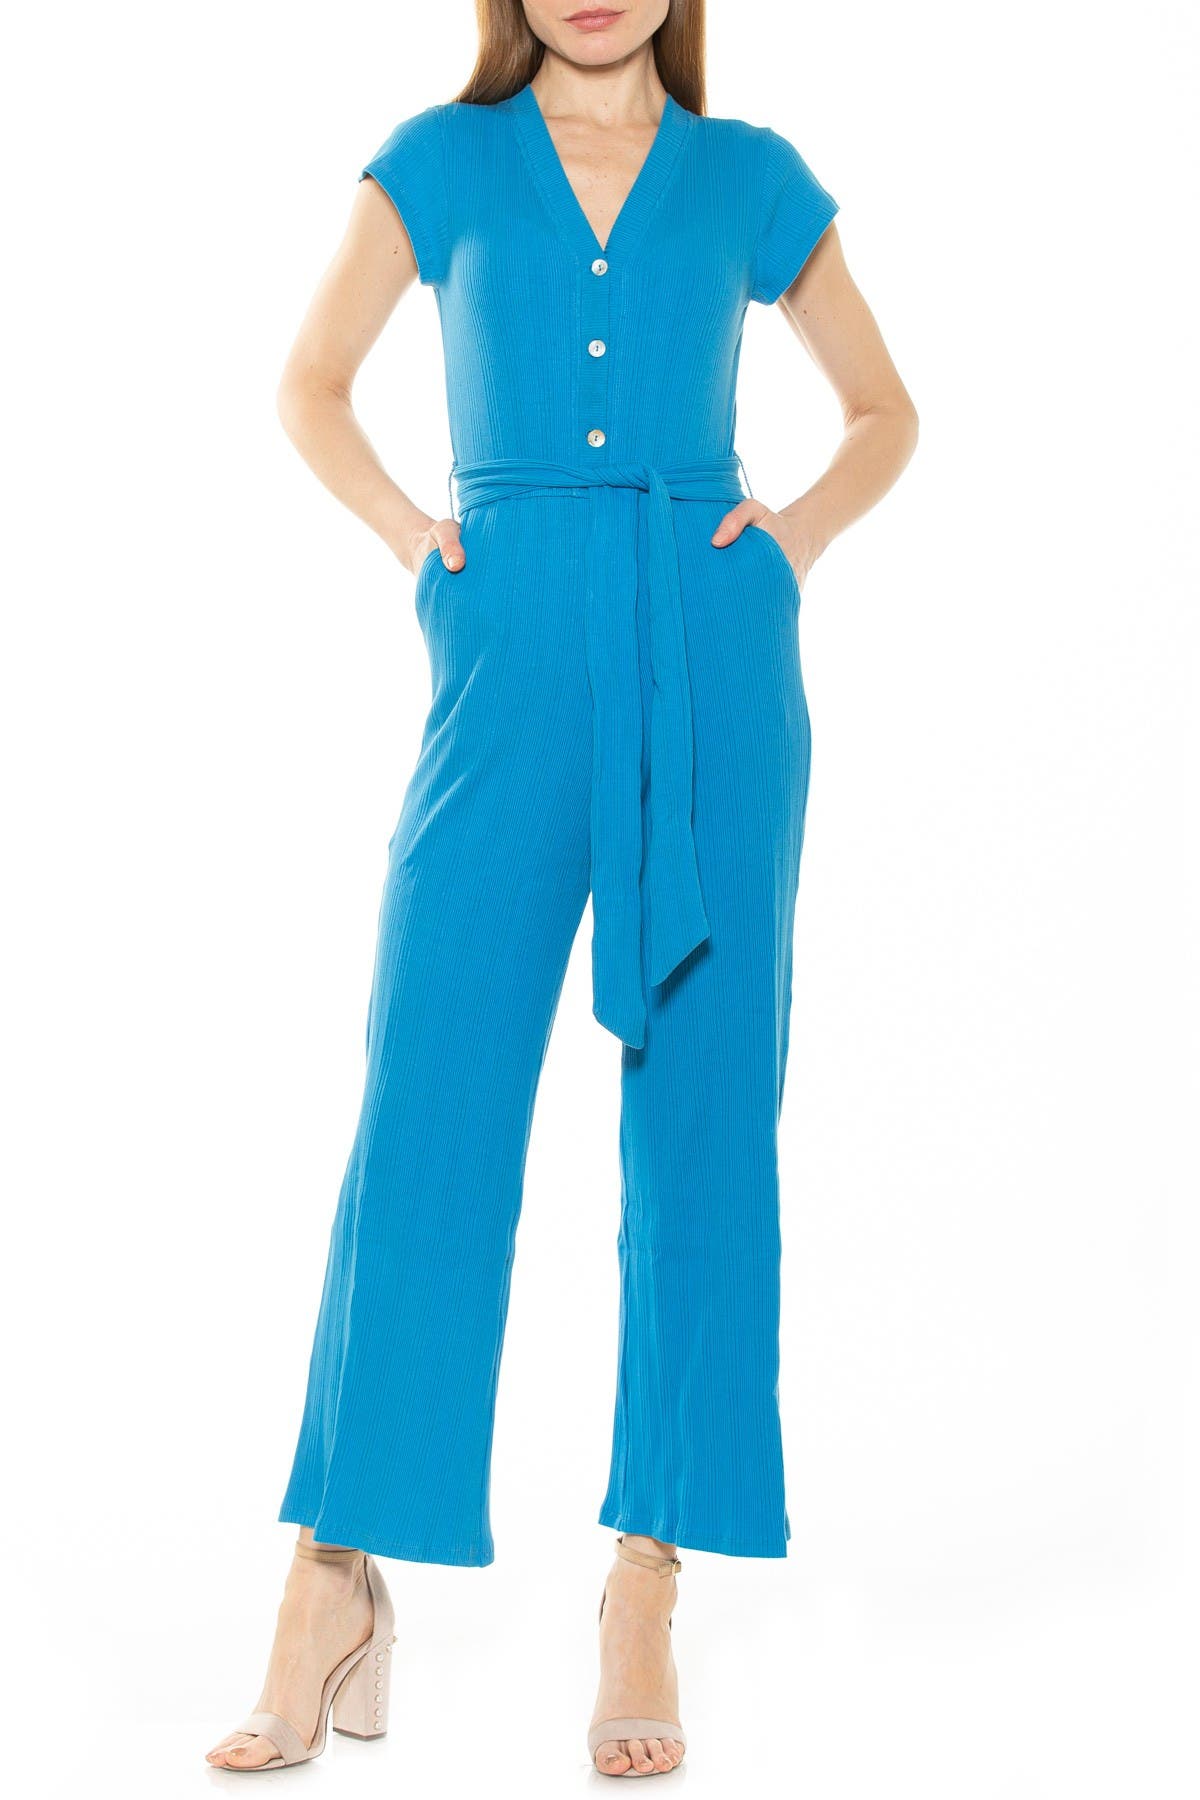 Alexia Admor Ezra Ribbed Button Down Straight Leg Jumpsuit In Royal Blue